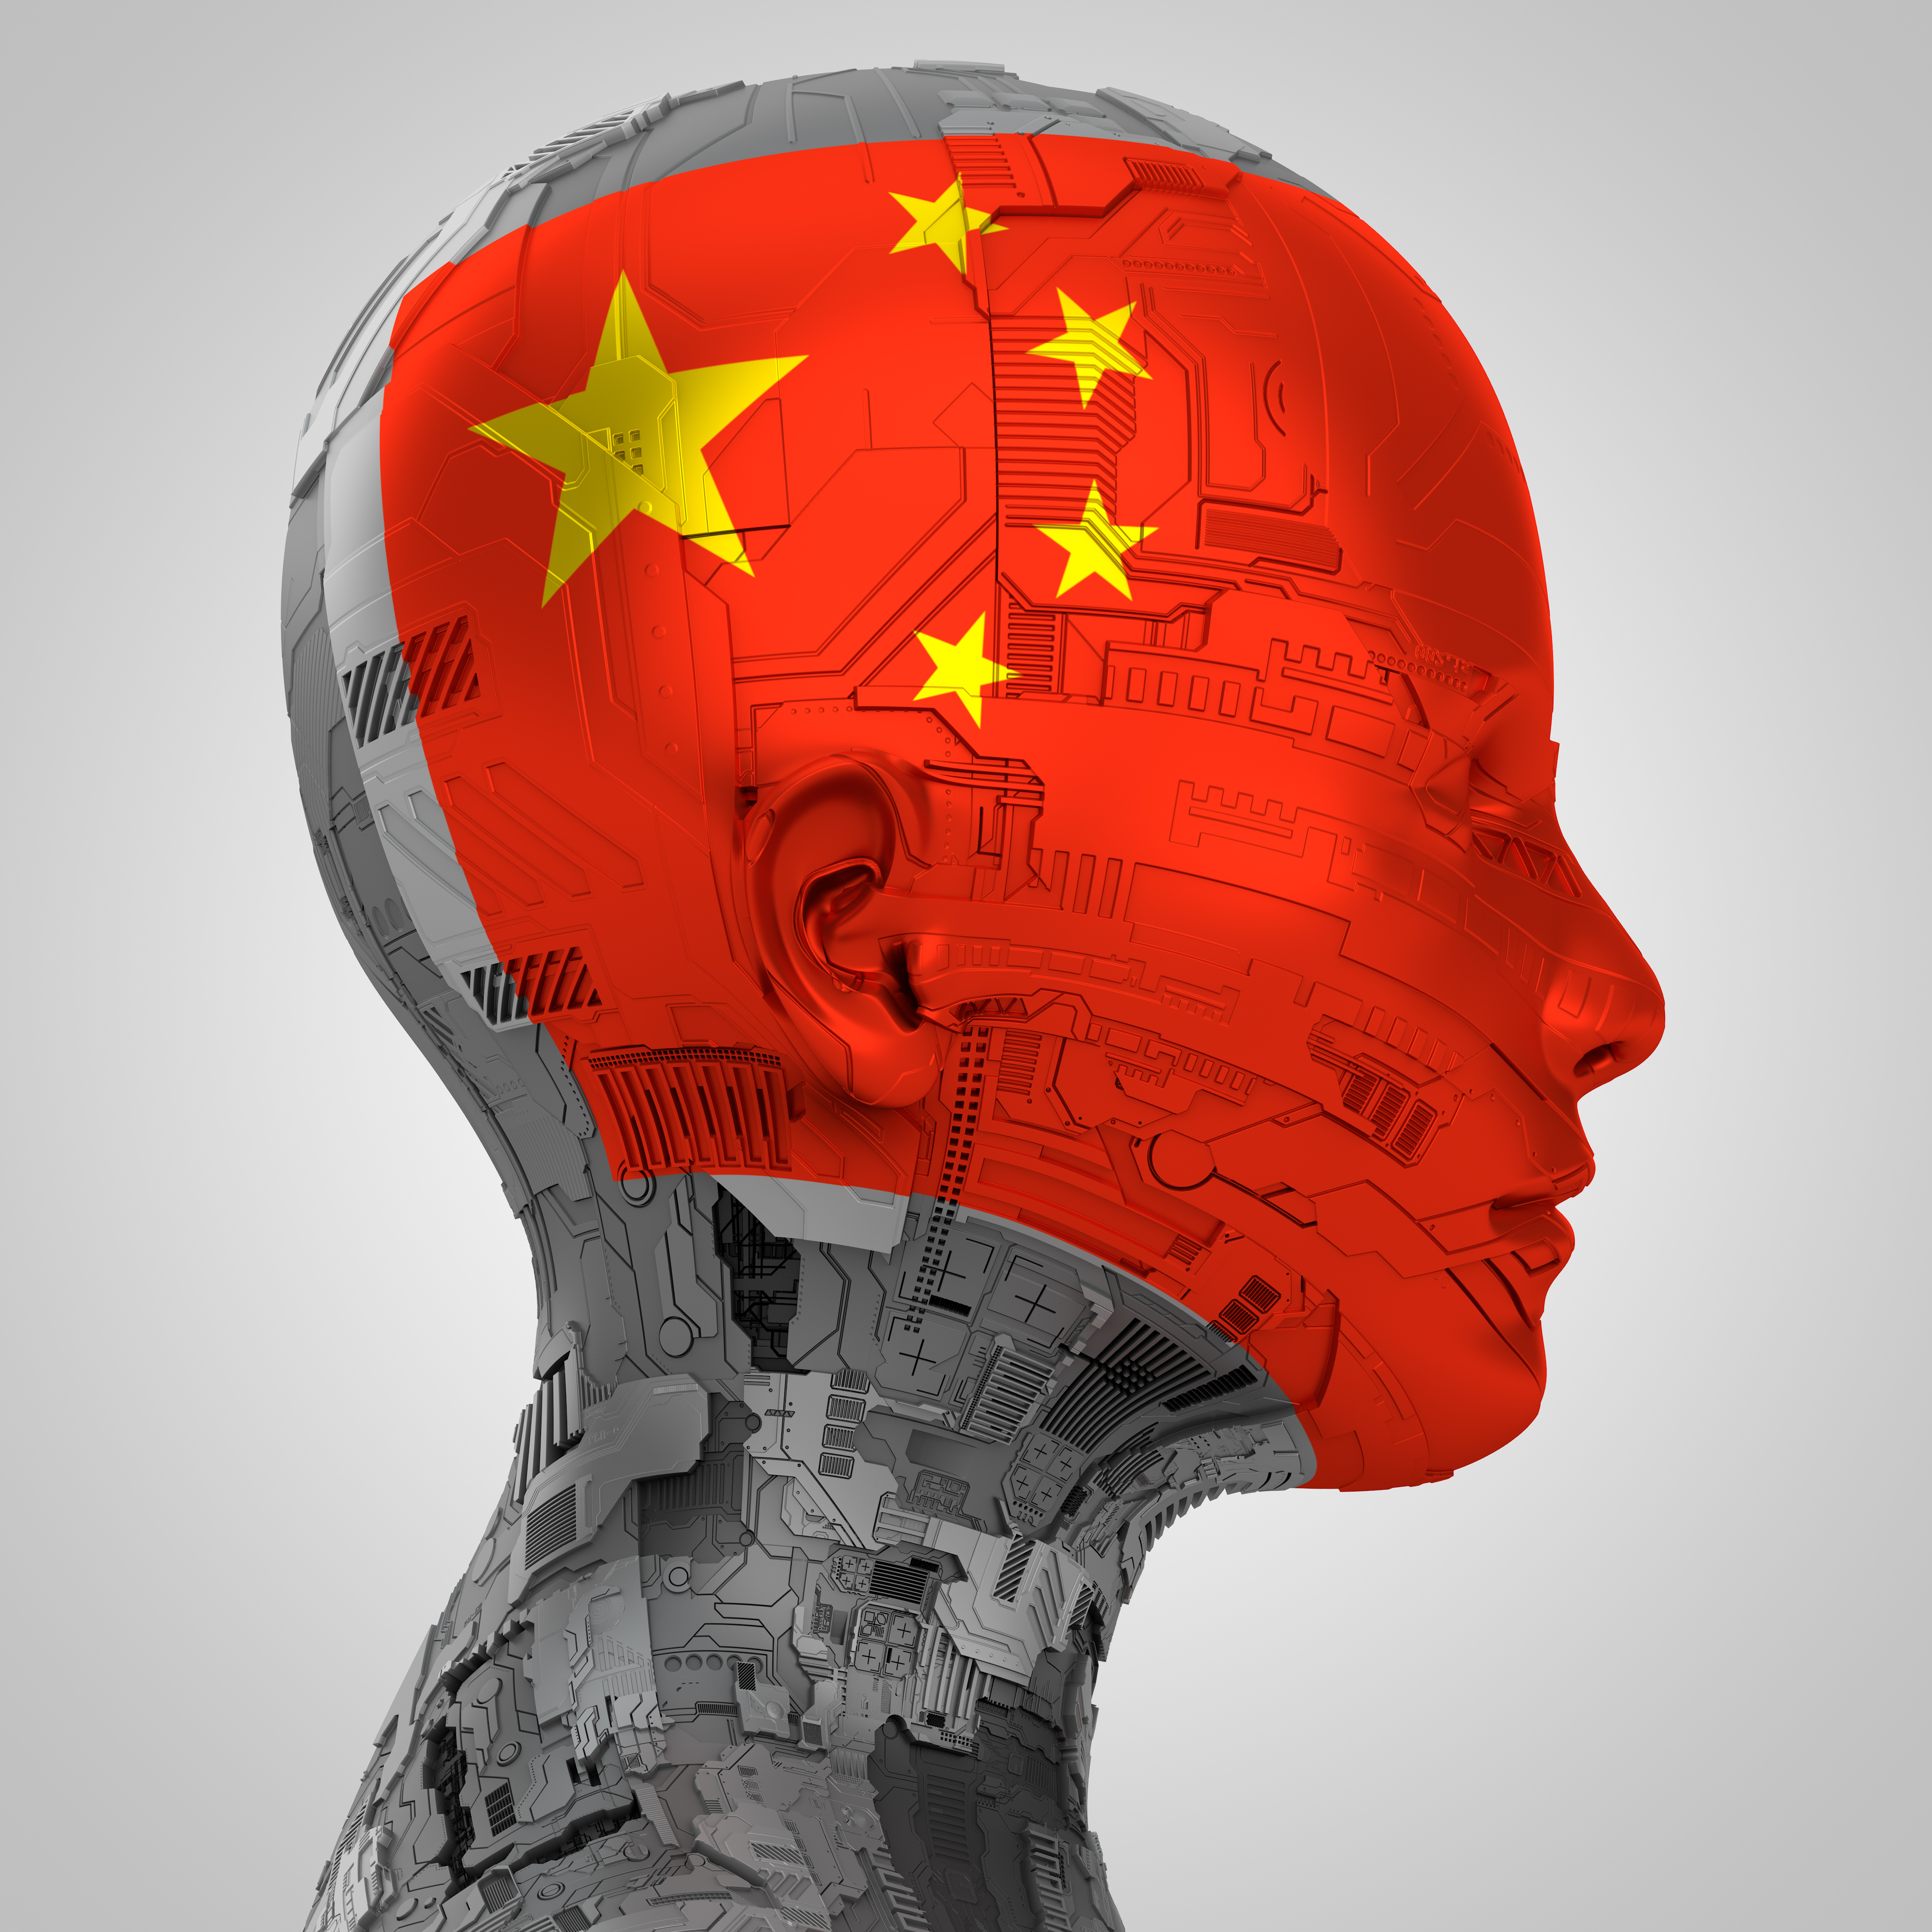 China’s artificial intelligence supremacy